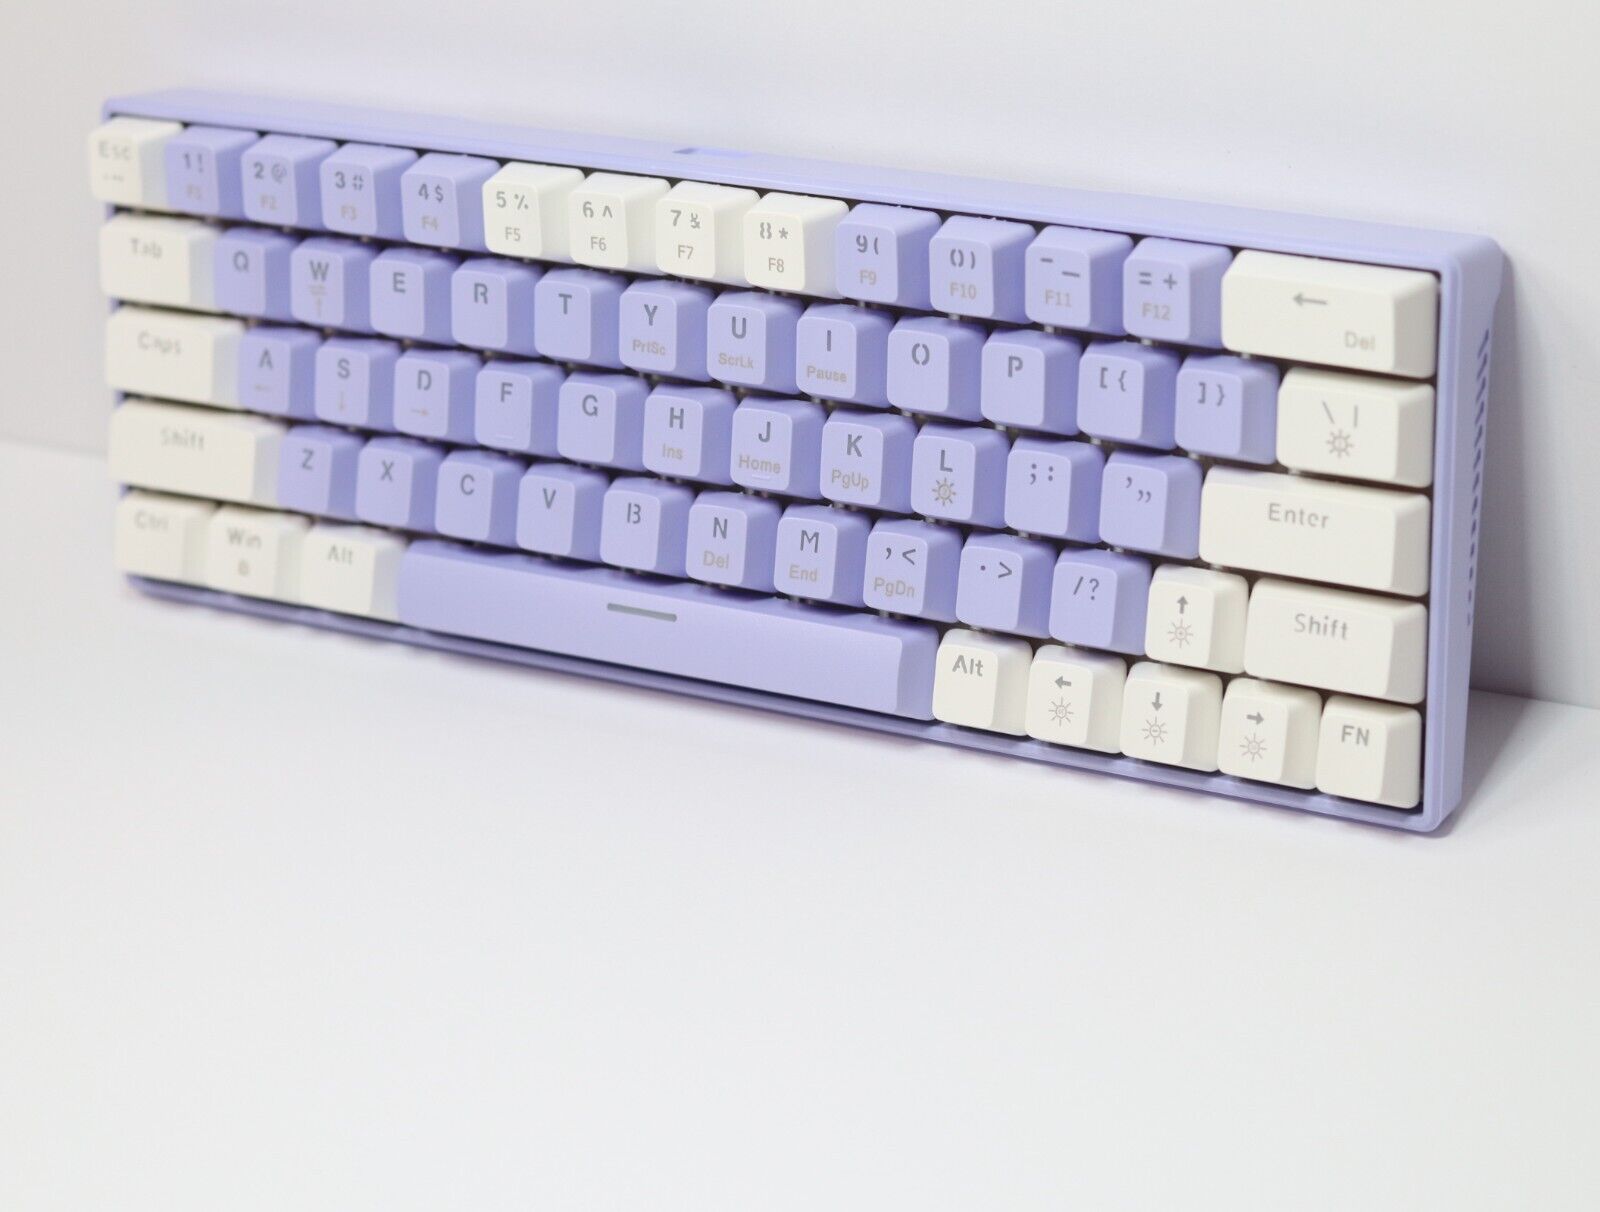 60% Hot-Swap Mechanical Keyboard - Red Switches - USB C - Purple/White